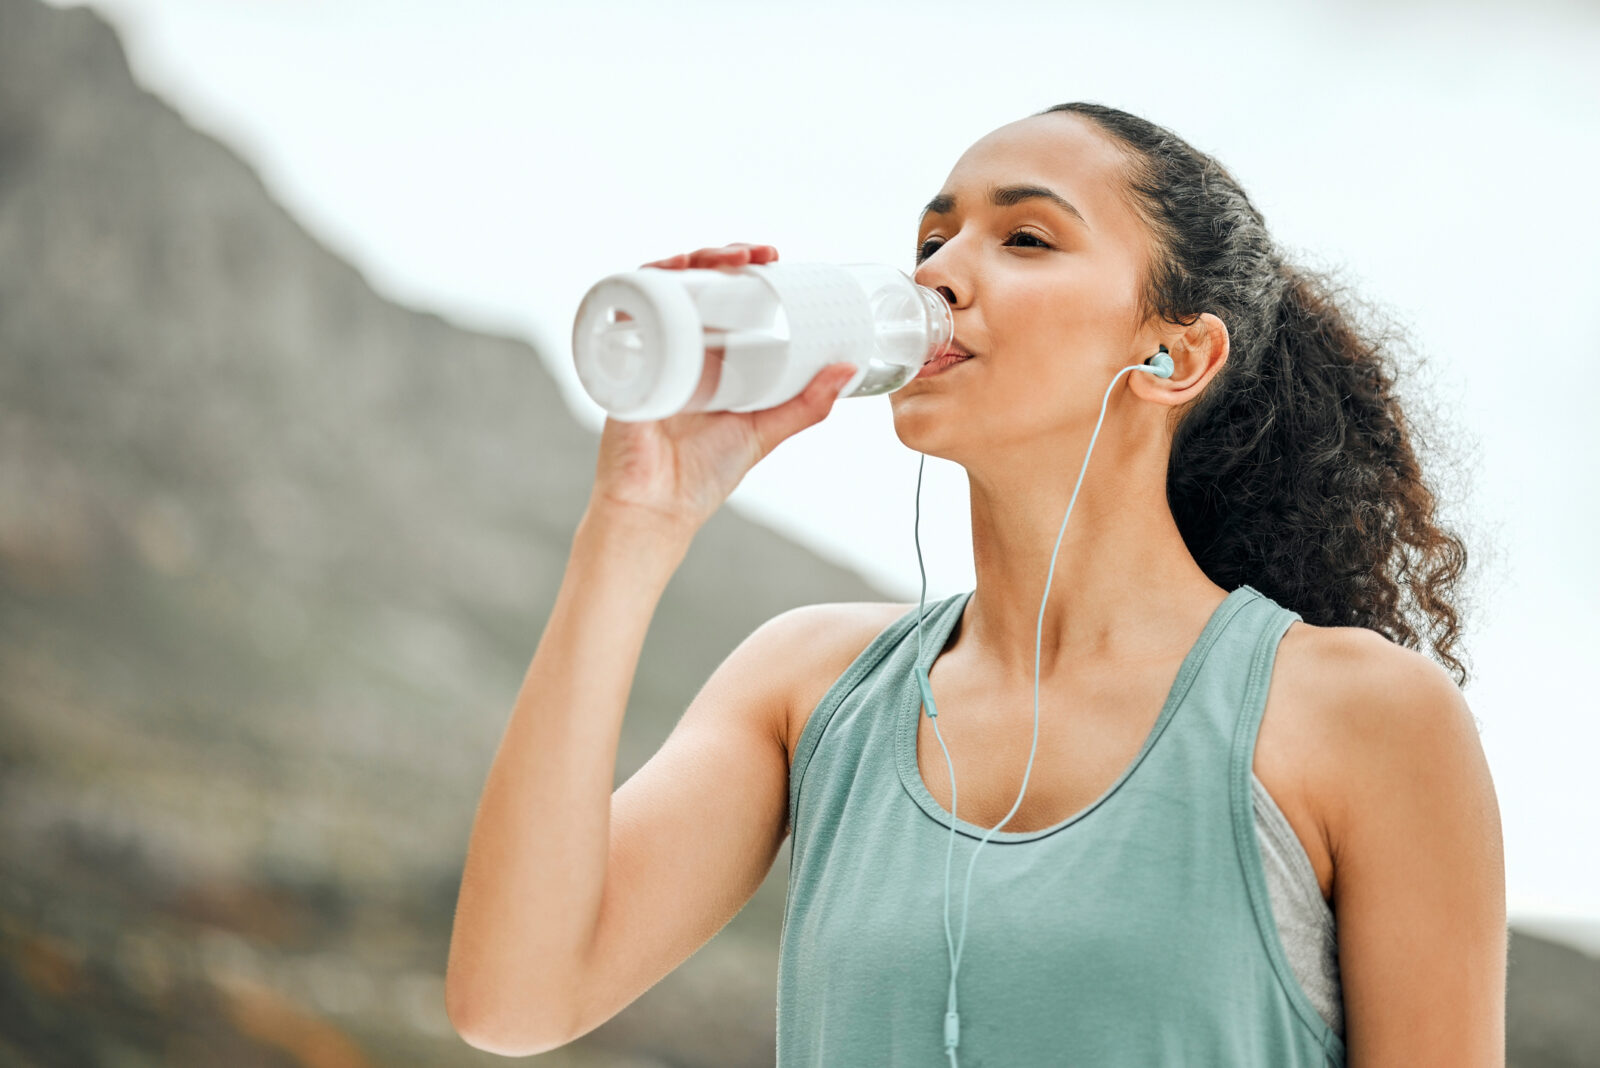 A picture of a young woman with dark hair drinking water after exercising, to illustrate an LCA blog post on Drinking Water Week 2023.